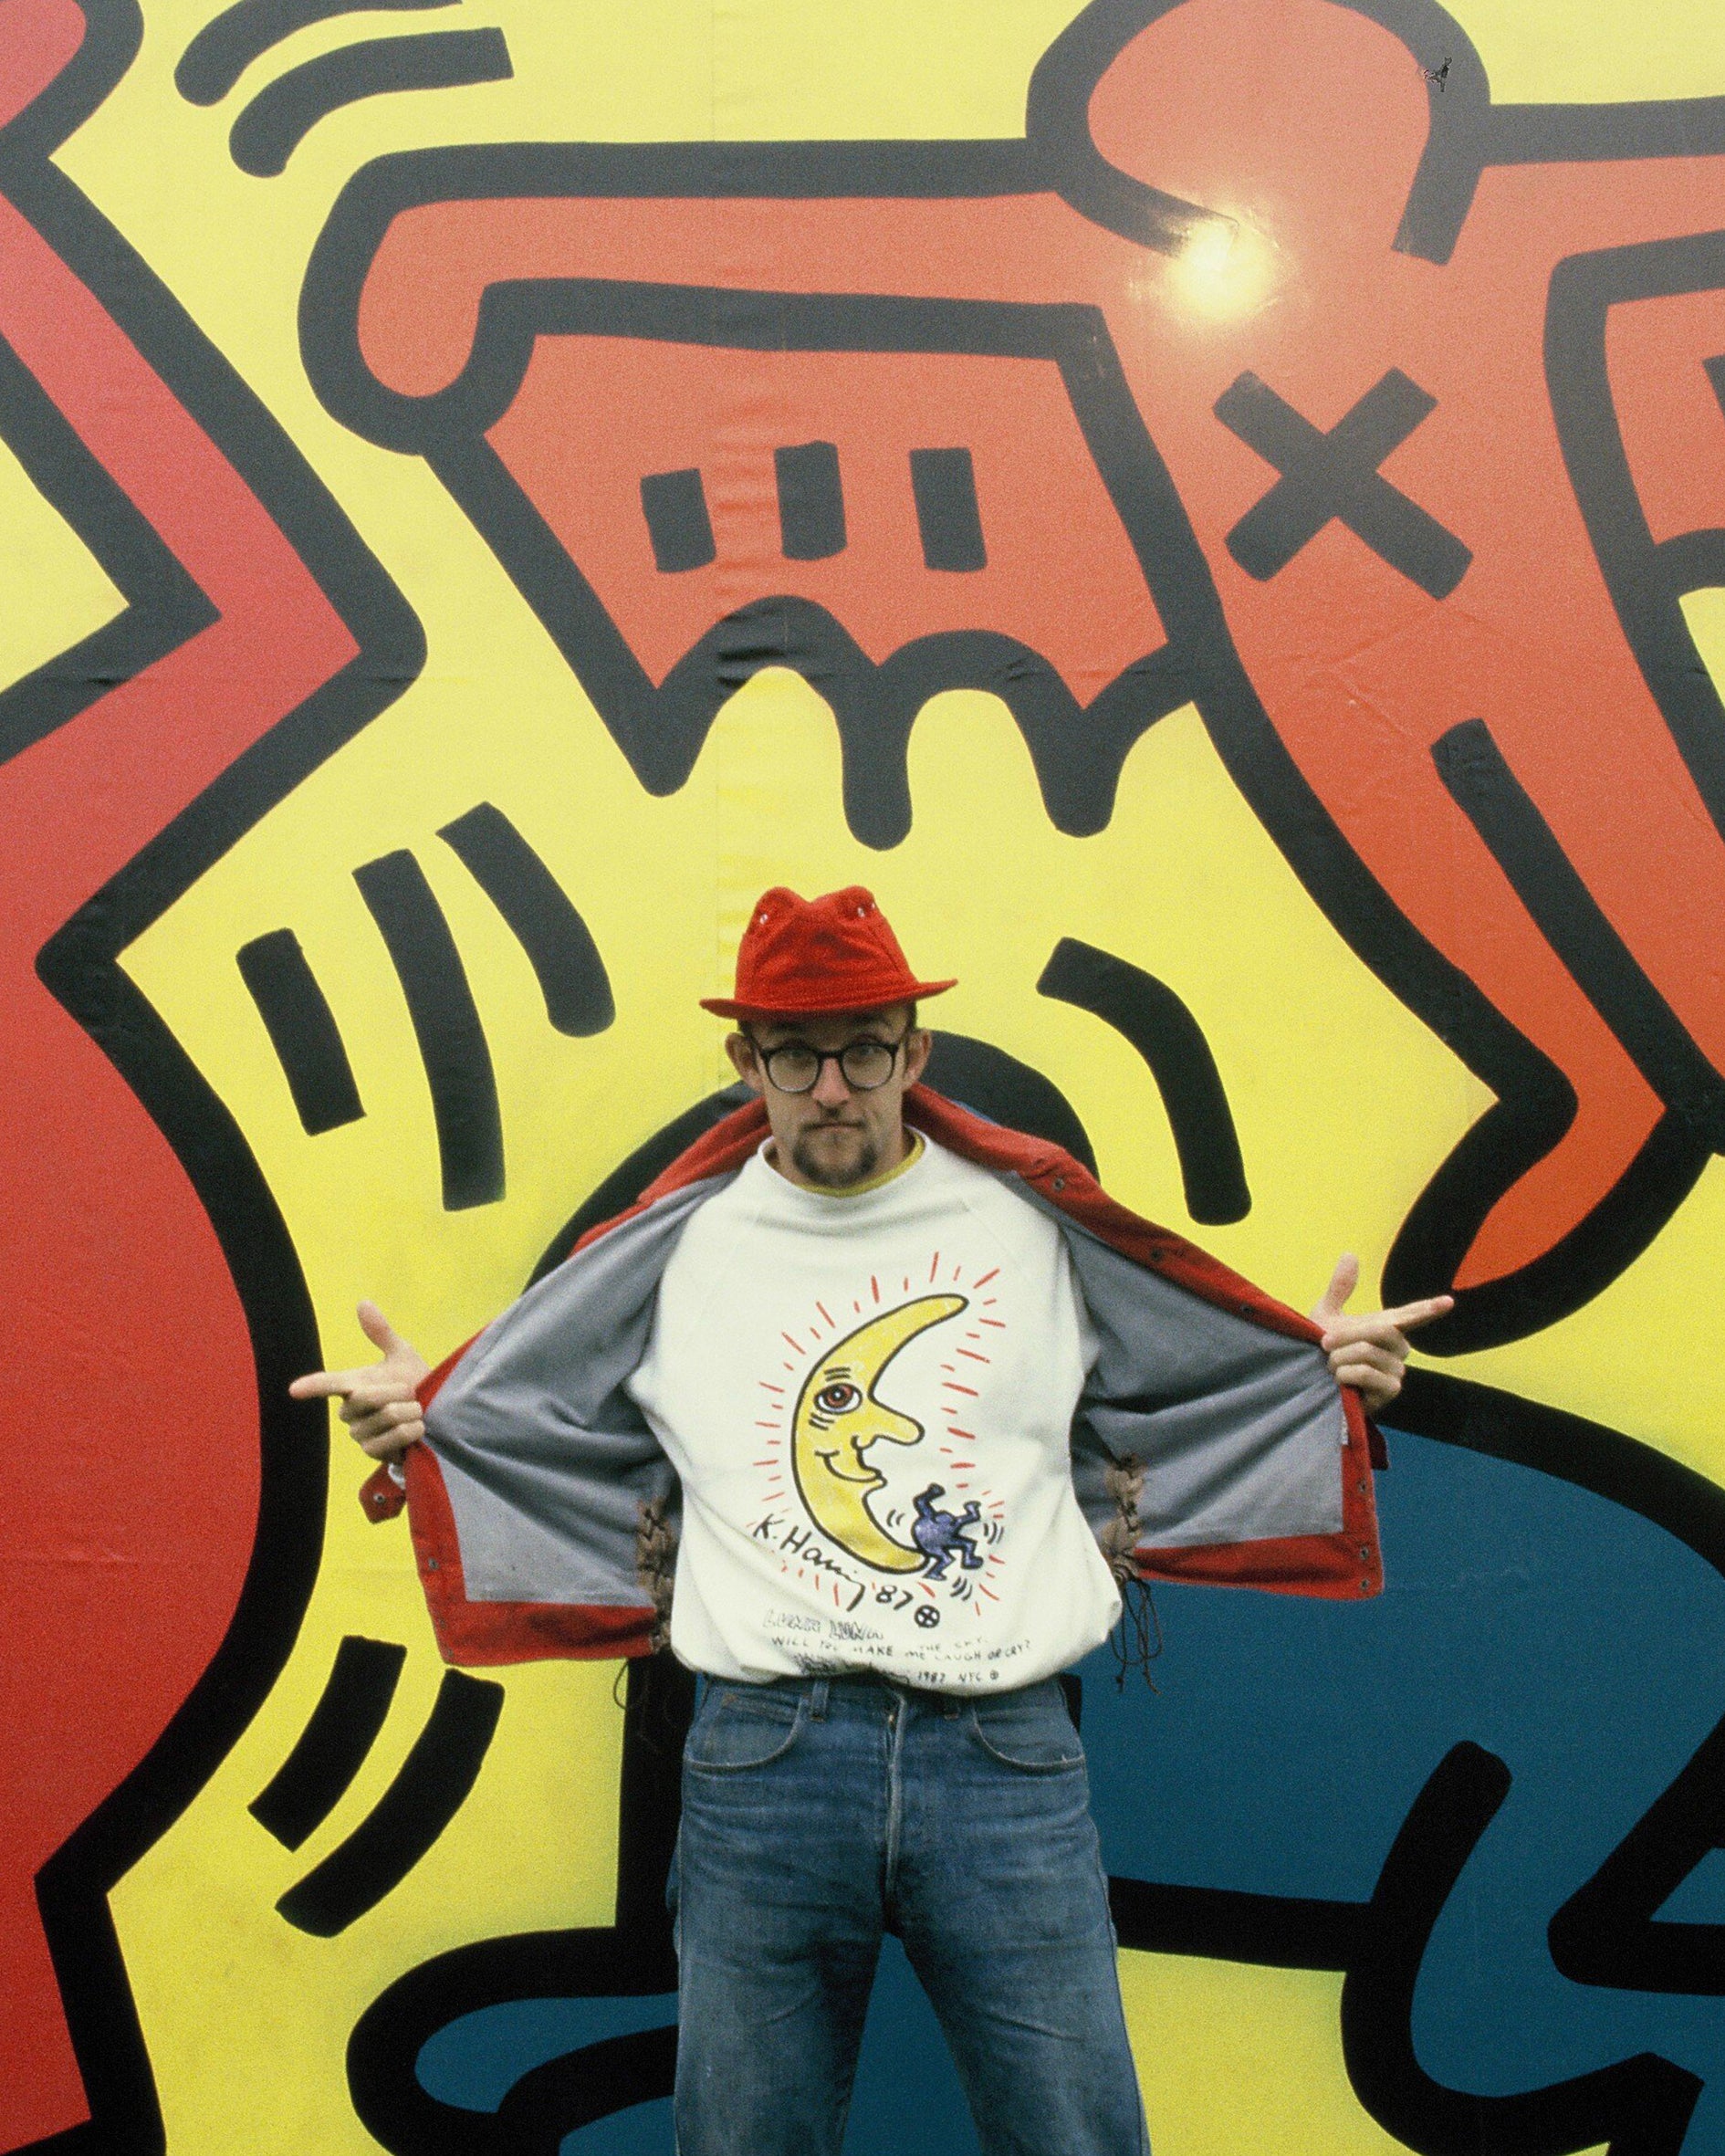 Archive photograph of Keith Haring wearing the Archival white Fitted Keith Haring sweater